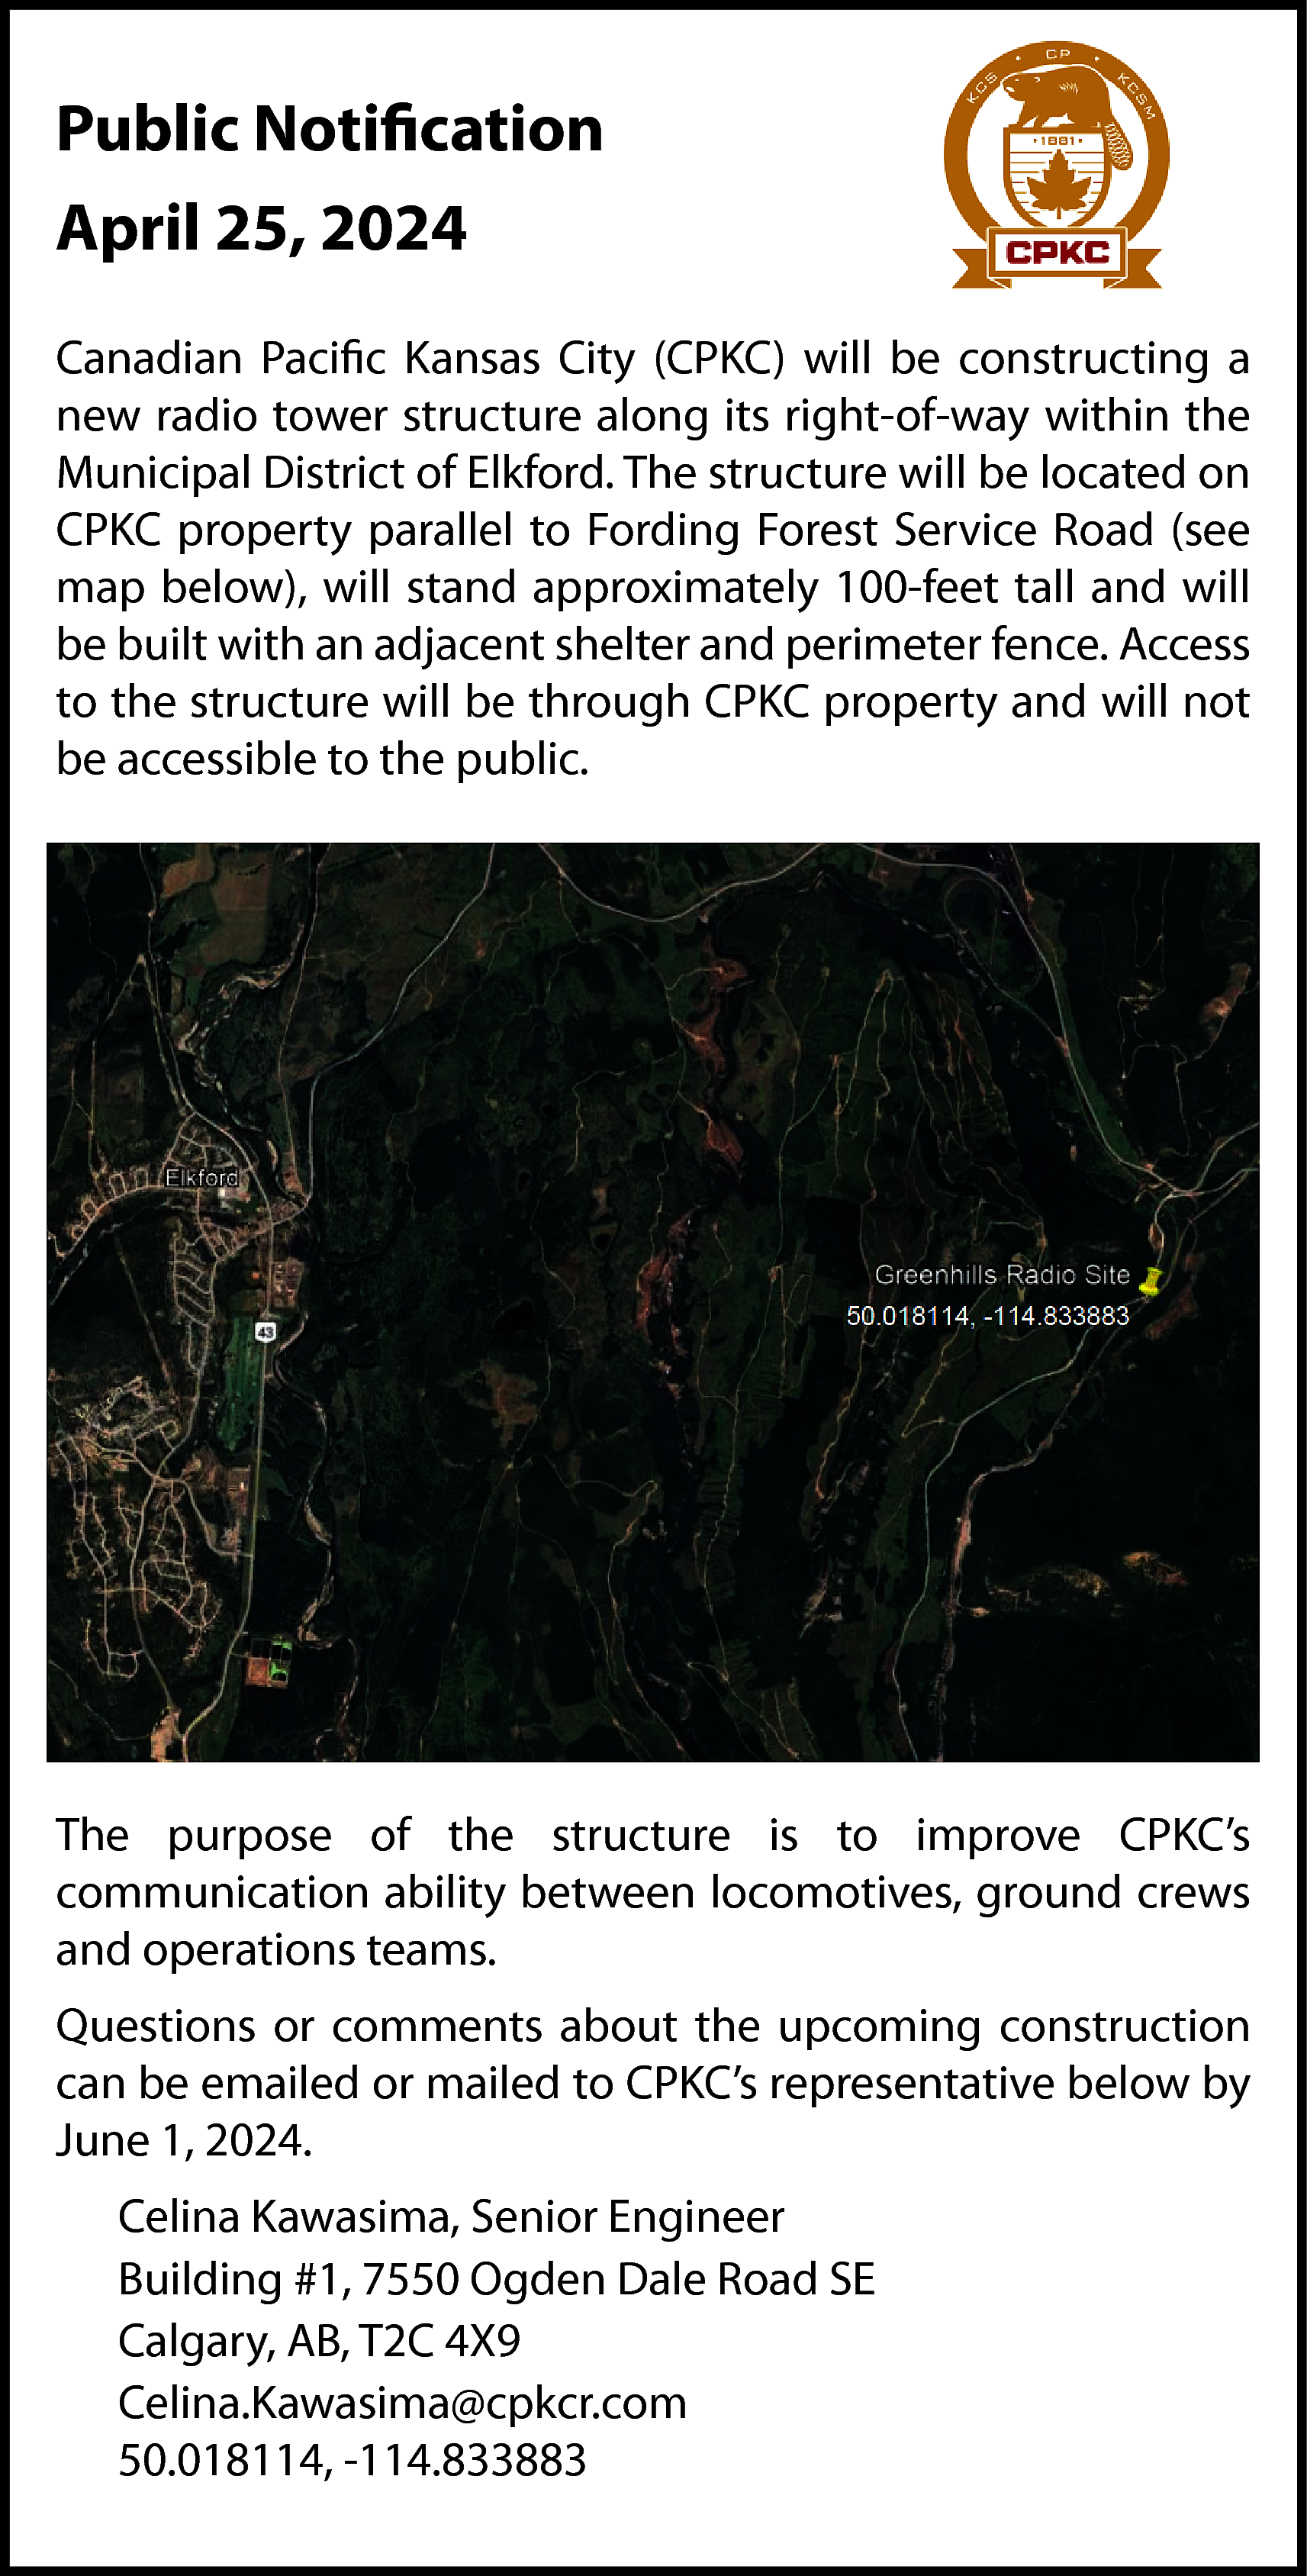 Public Notification <br>April 25, 2024  Public Notification  April 25, 2024  Canadian Pacific Kansas City (CPKC) will be constructing a  new radio tower structure along its right-of-way within the  Municipal District of Elkford. The structure will be located on  CPKC property parallel to Fording Forest Service Road (see  map below), will stand approximately 100-feet tall and will  be built with an adjacent shelter and perimeter fence. Access  to the structure will be through CPKC property and will not  be accessible to the public.    The purpose of the structure is to improve CPKC’s  communication ability between locomotives, ground crews  and operations teams.  Questions or comments about the upcoming construction  can be emailed or mailed to CPKC’s representative below by  June 1, 2024.  Celina Kawasima, Senior Engineer  Building #1, 7550 Ogden Dale Road SE  Calgary, AB, T2C 4X9  Celina.Kawasima@cpkcr.com  50.018114, -114.833883    